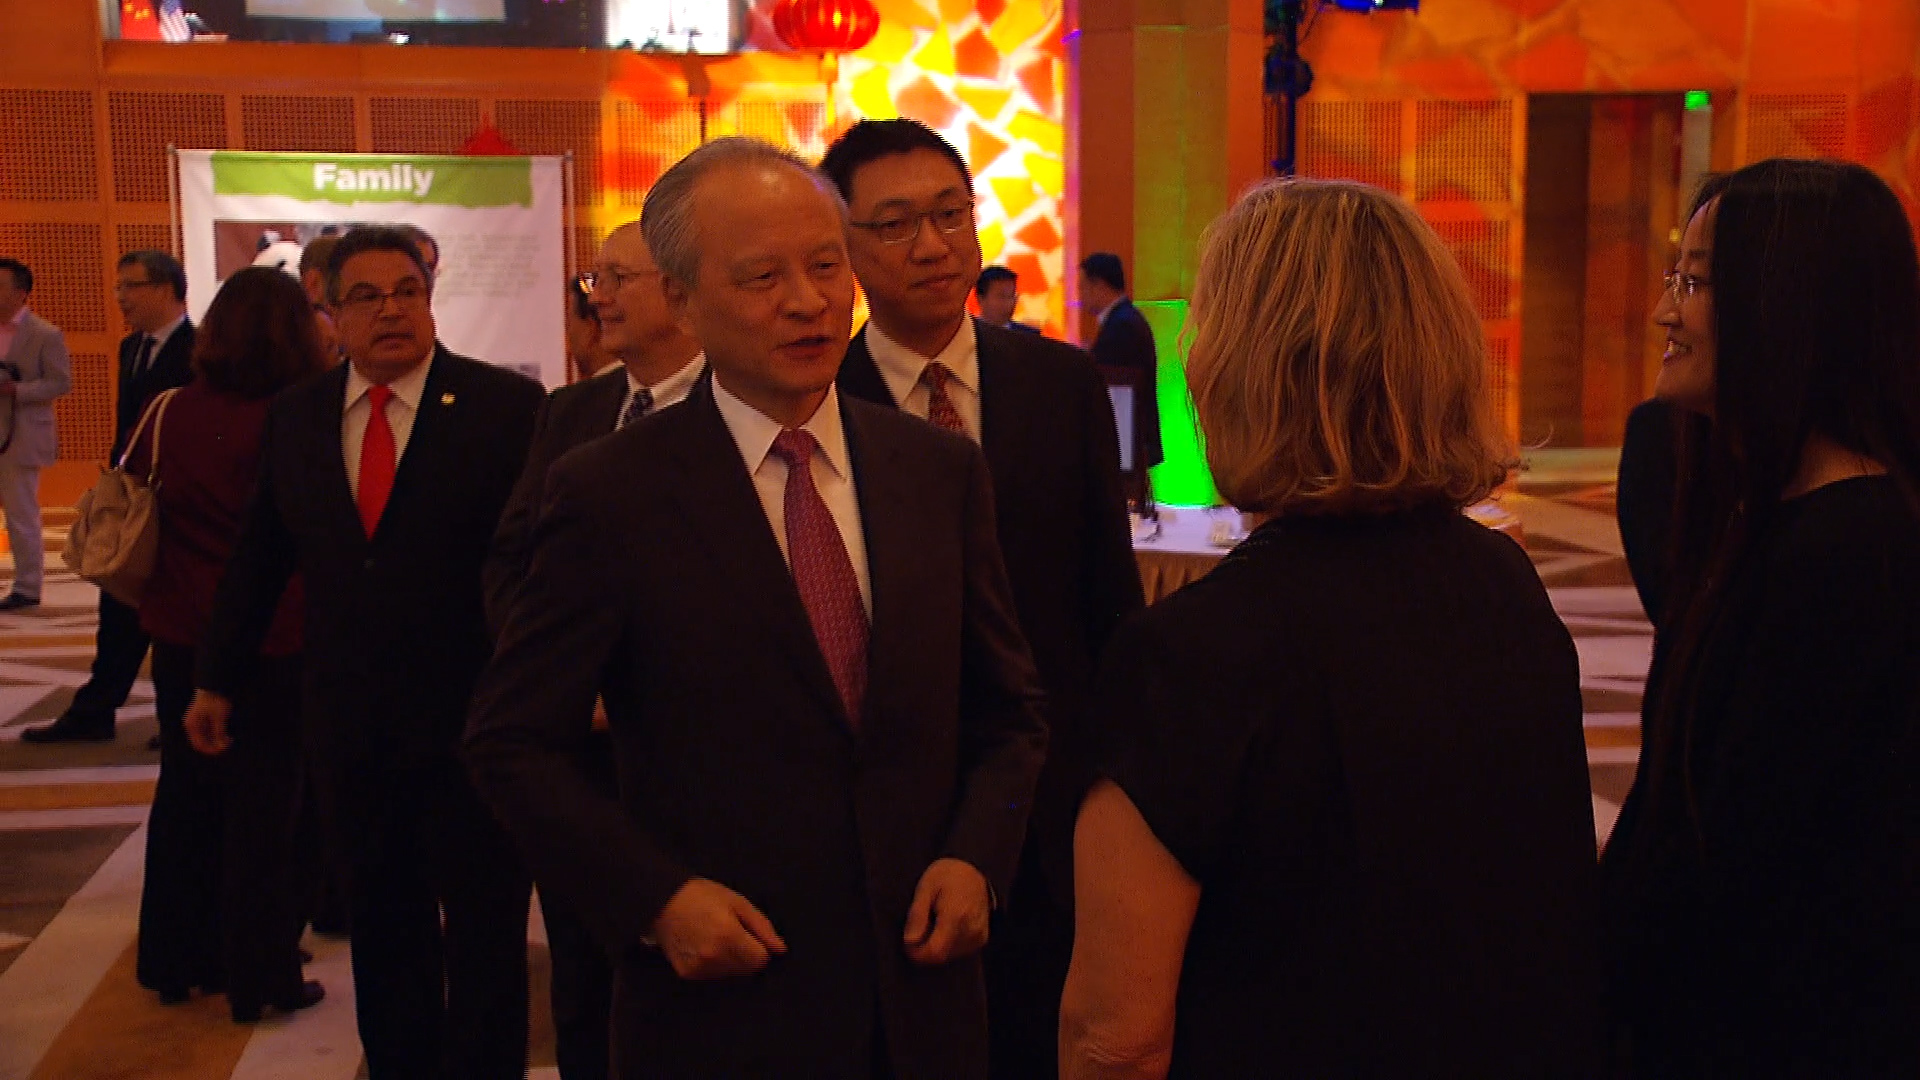 China's Ambassador to the United States Cui Tiankai speaks to Kung Fu Panda 3 Director Jennifer Yuh Nelson (far left) and another guest at the Embassy's screening of the film.